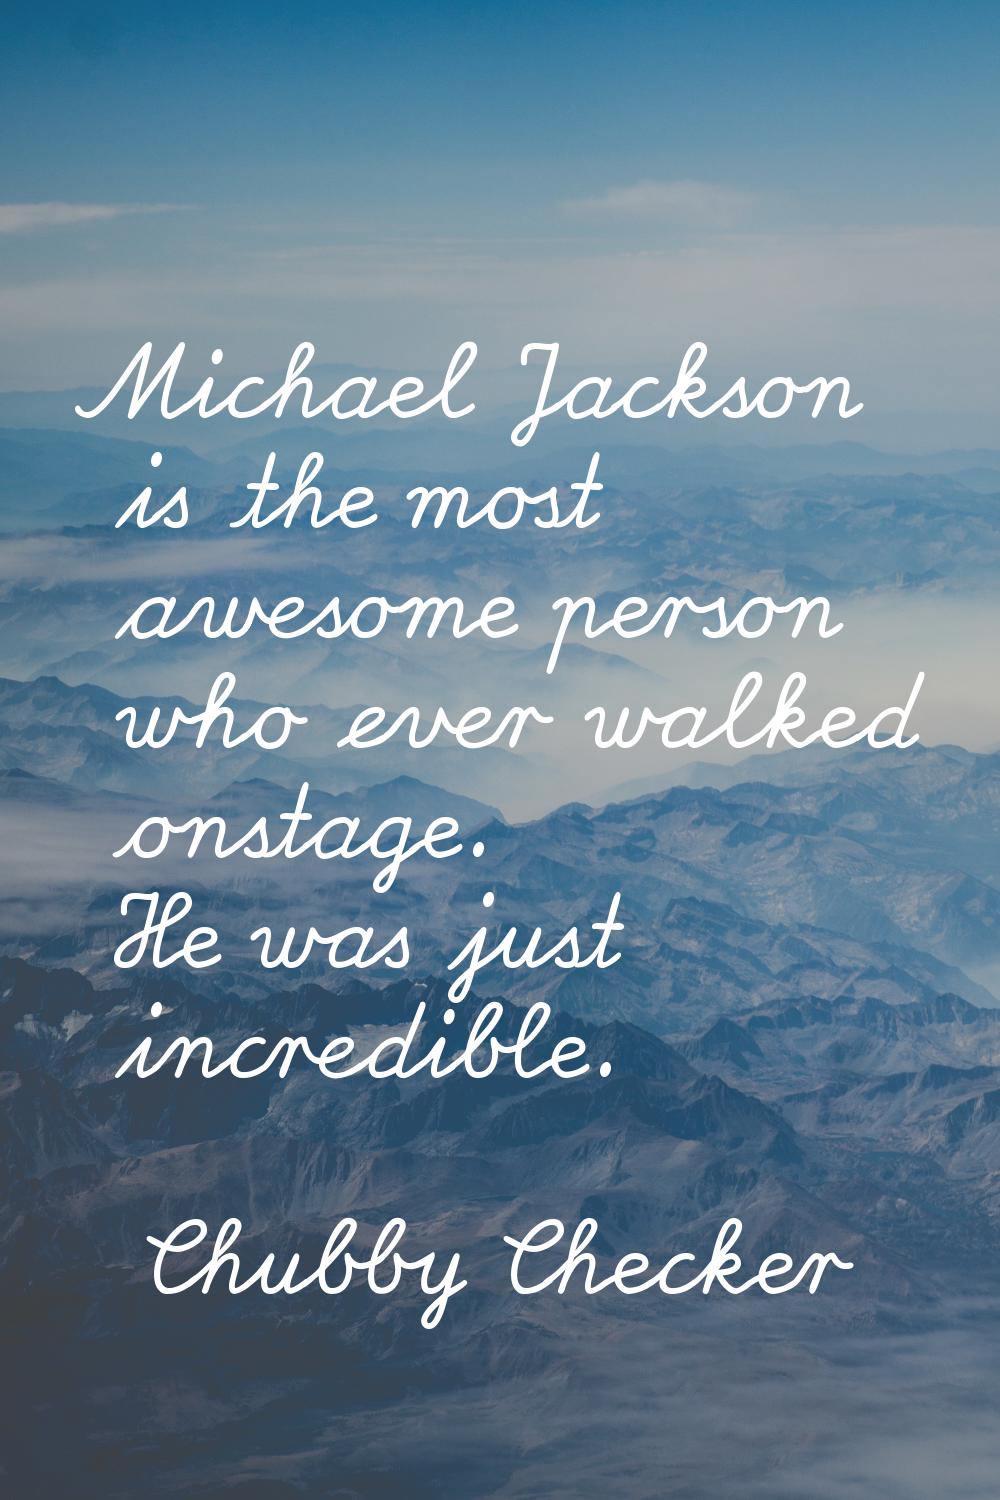 Michael Jackson is the most awesome person who ever walked onstage. He was just incredible.